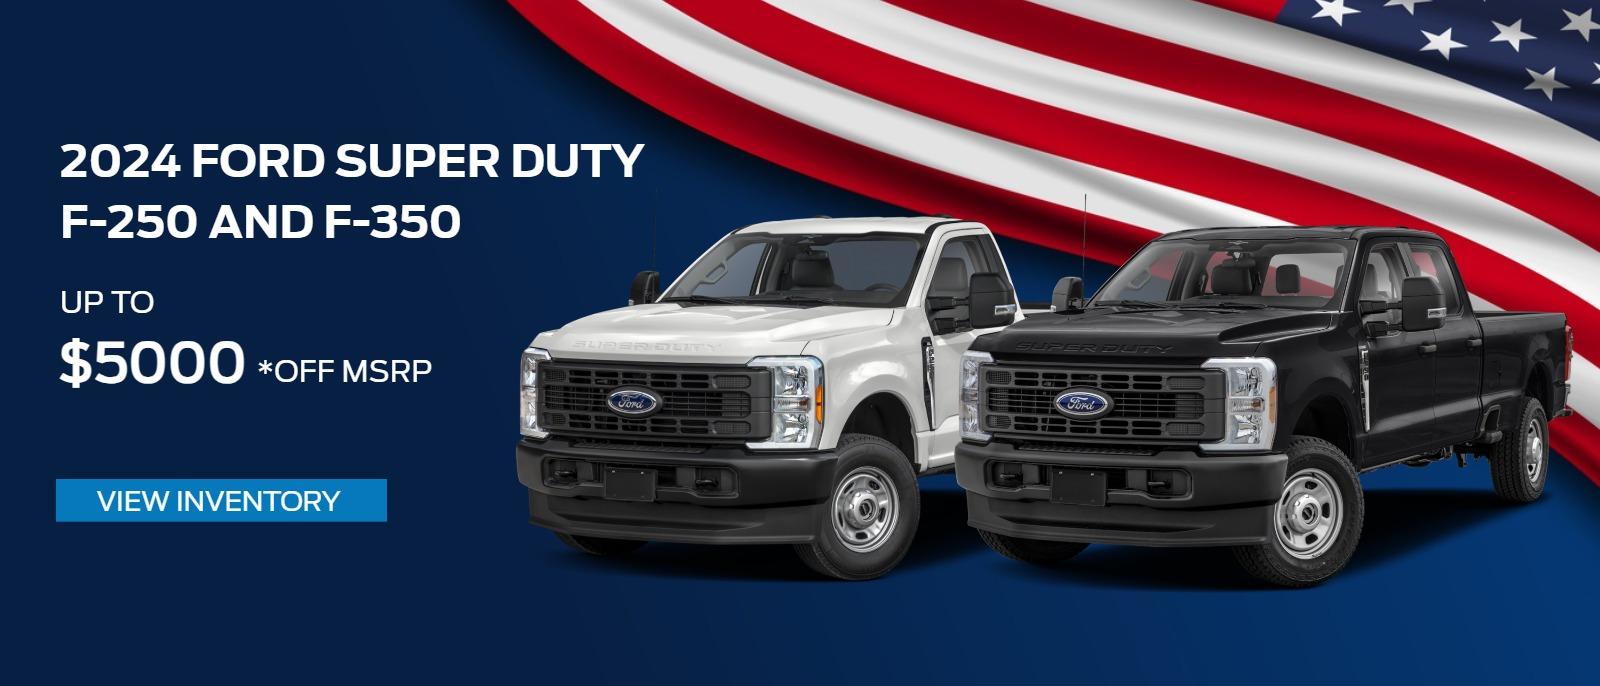 2024 Ford Super Duty F-250 and F-350| patriotic theme